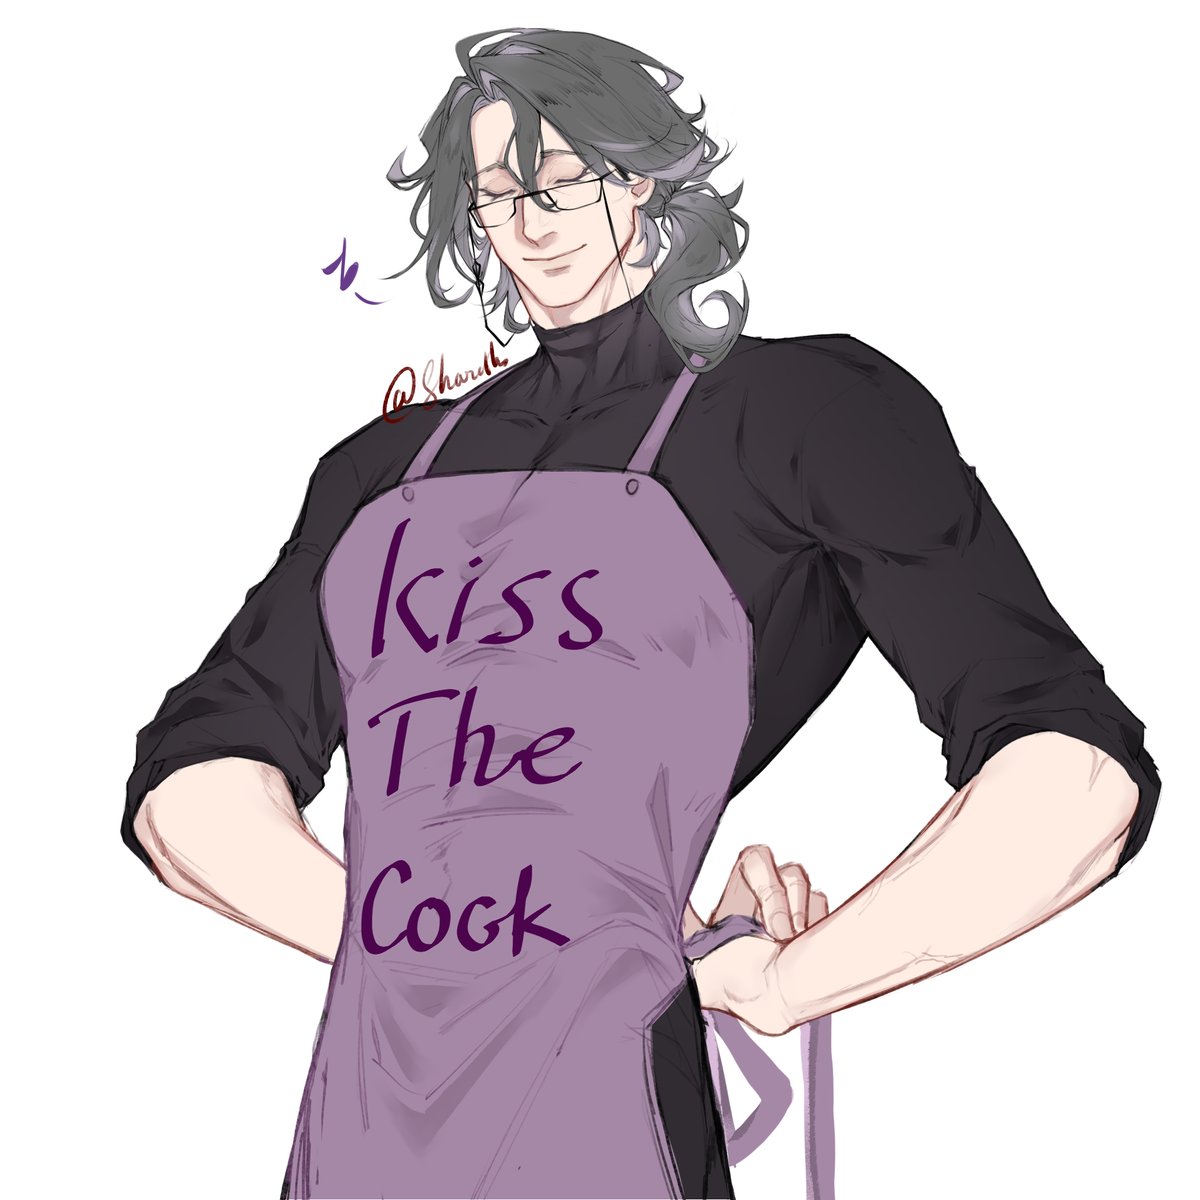 kiss the coc- i mean cook.
#Pantalone